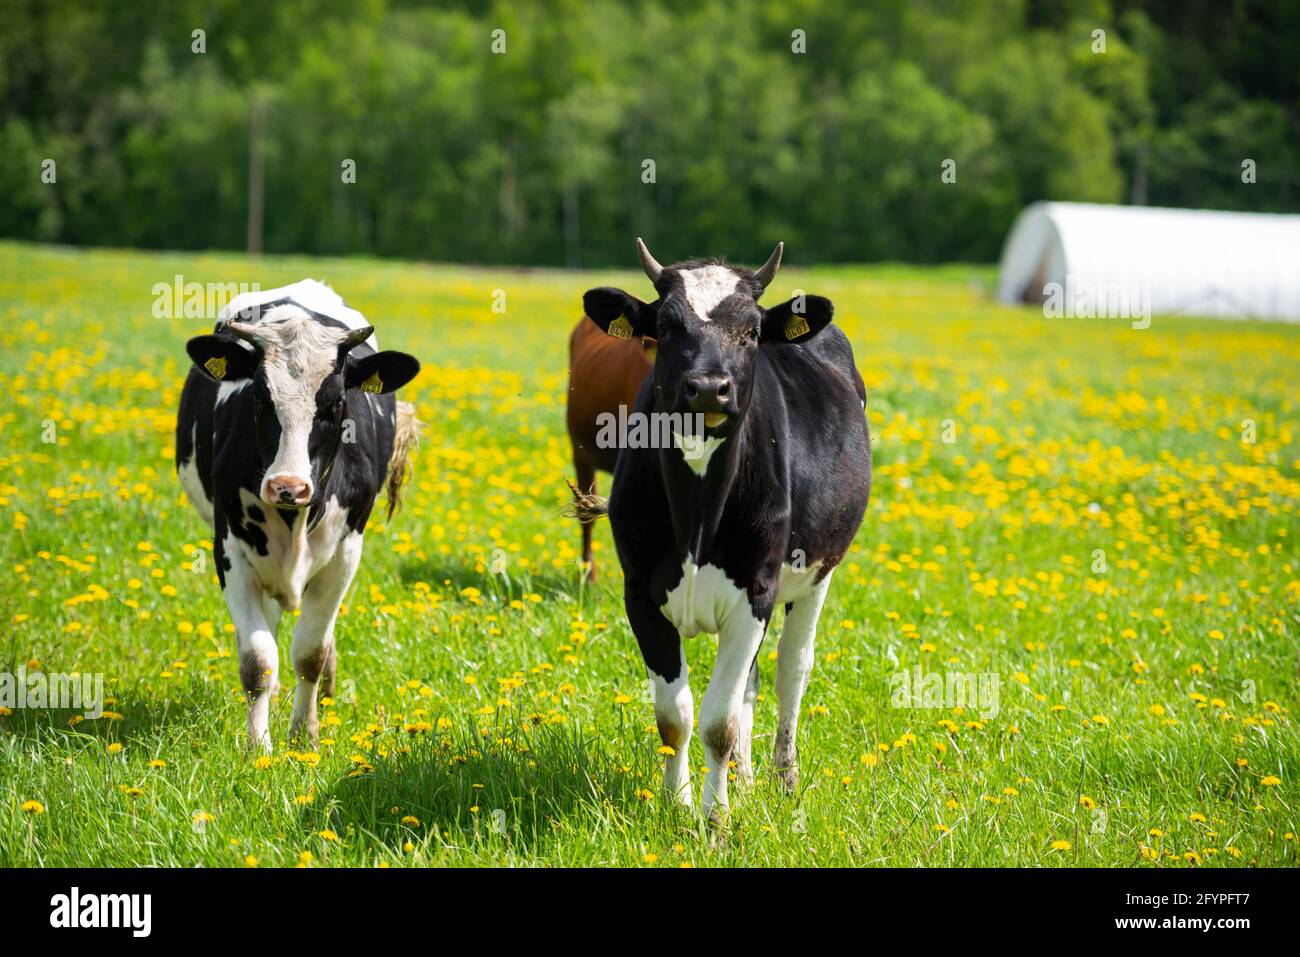 Meadow full of dandelions with grazing cows Stock Photo